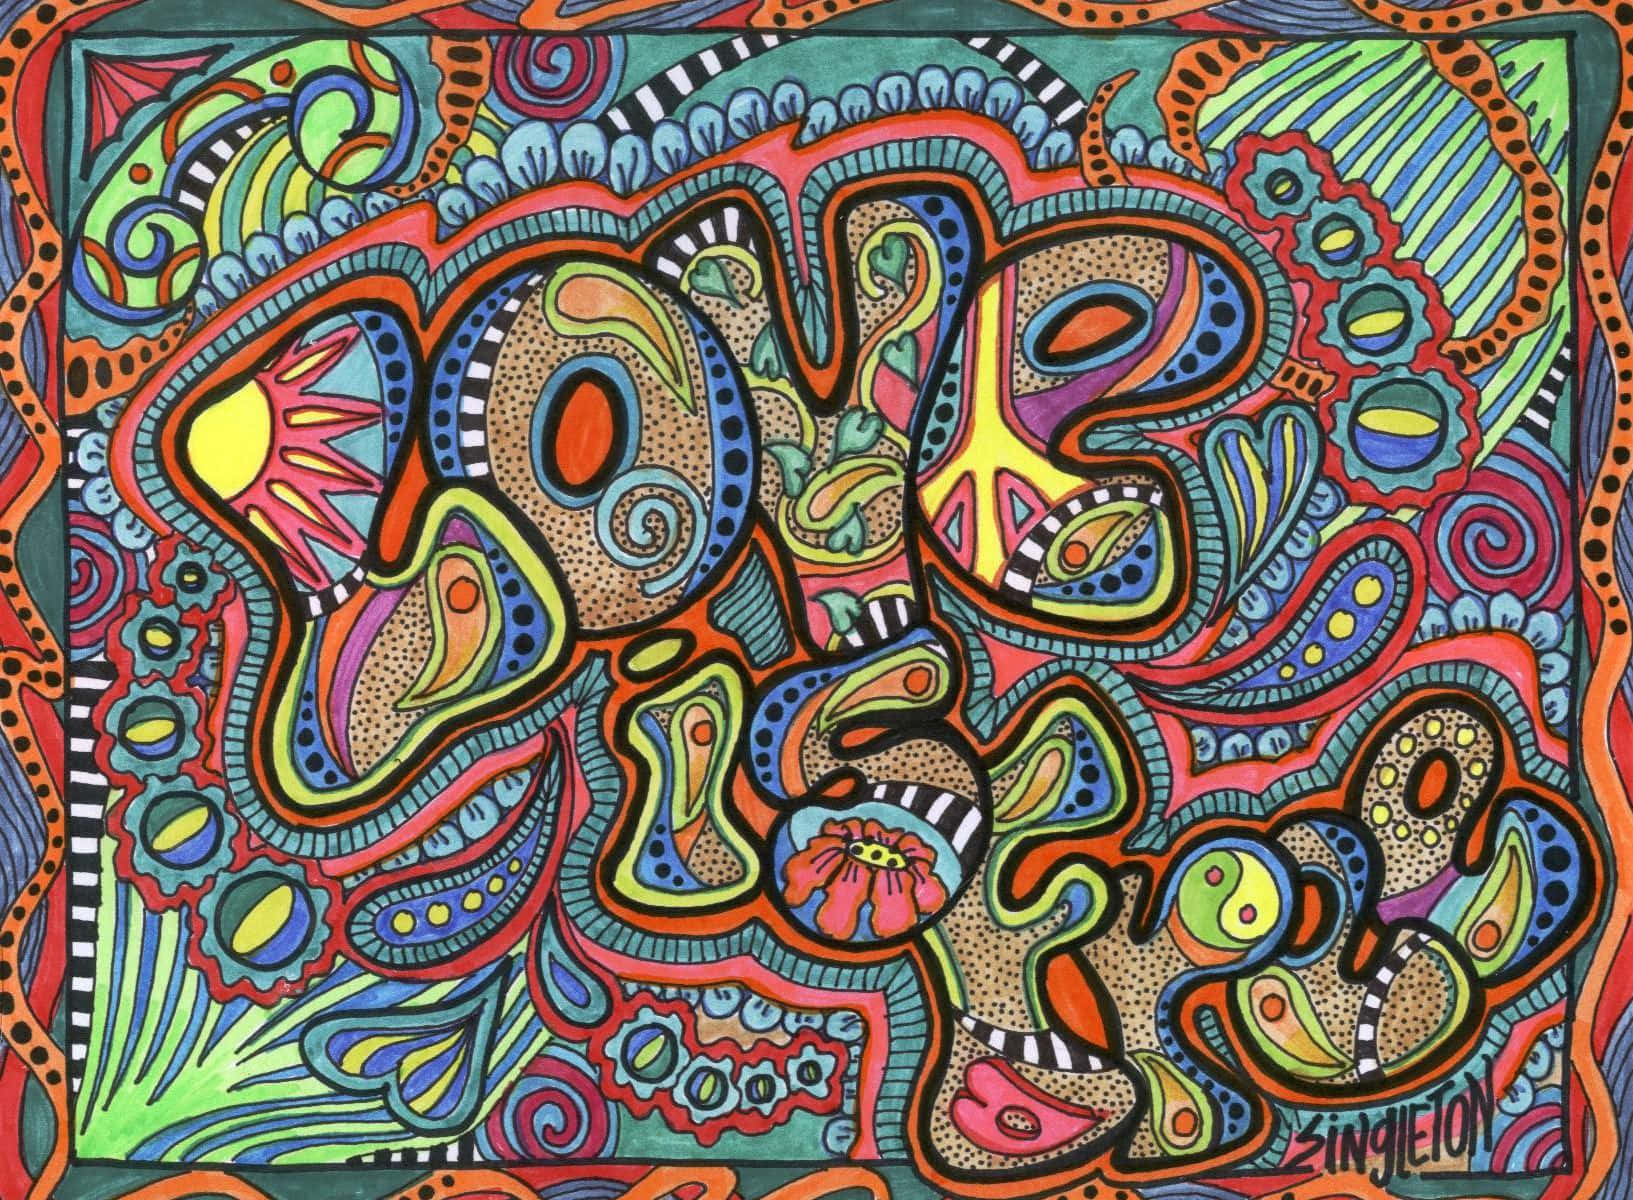 A Colorful Psychedelic Art Print With A Doodle Design Wallpaper